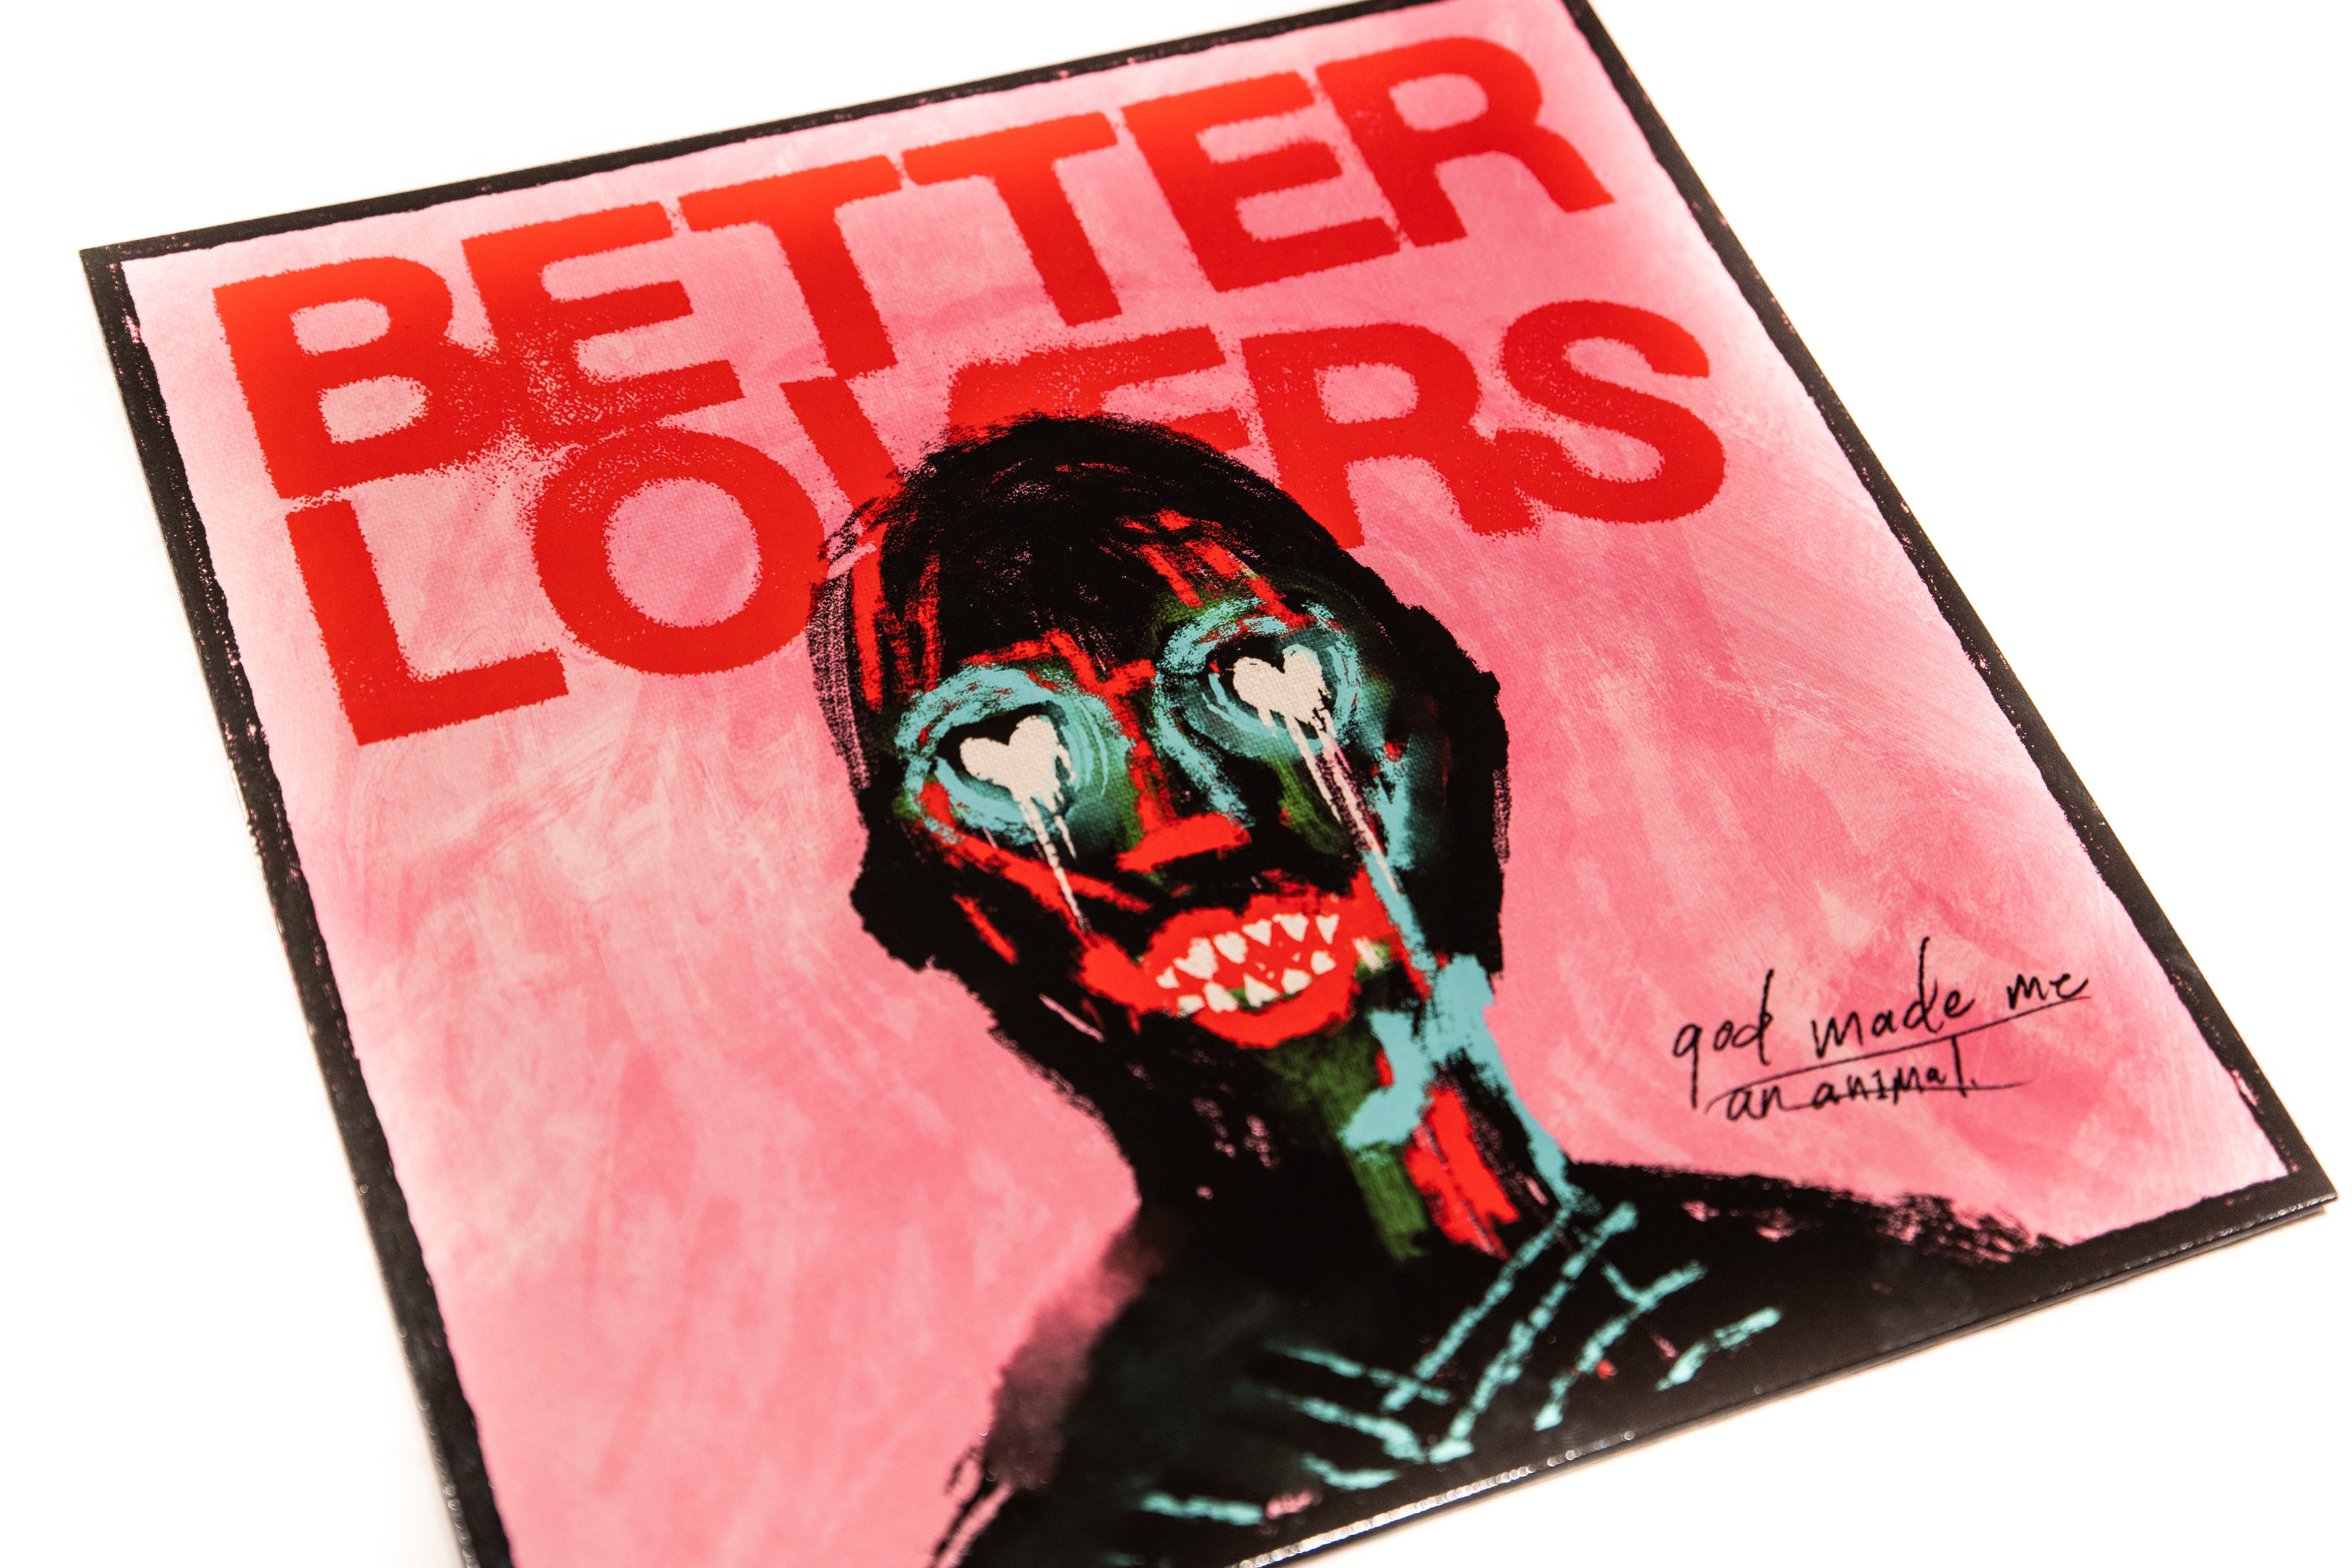 Better Lovers - God Made Me an Animal LP Anniversary Edition